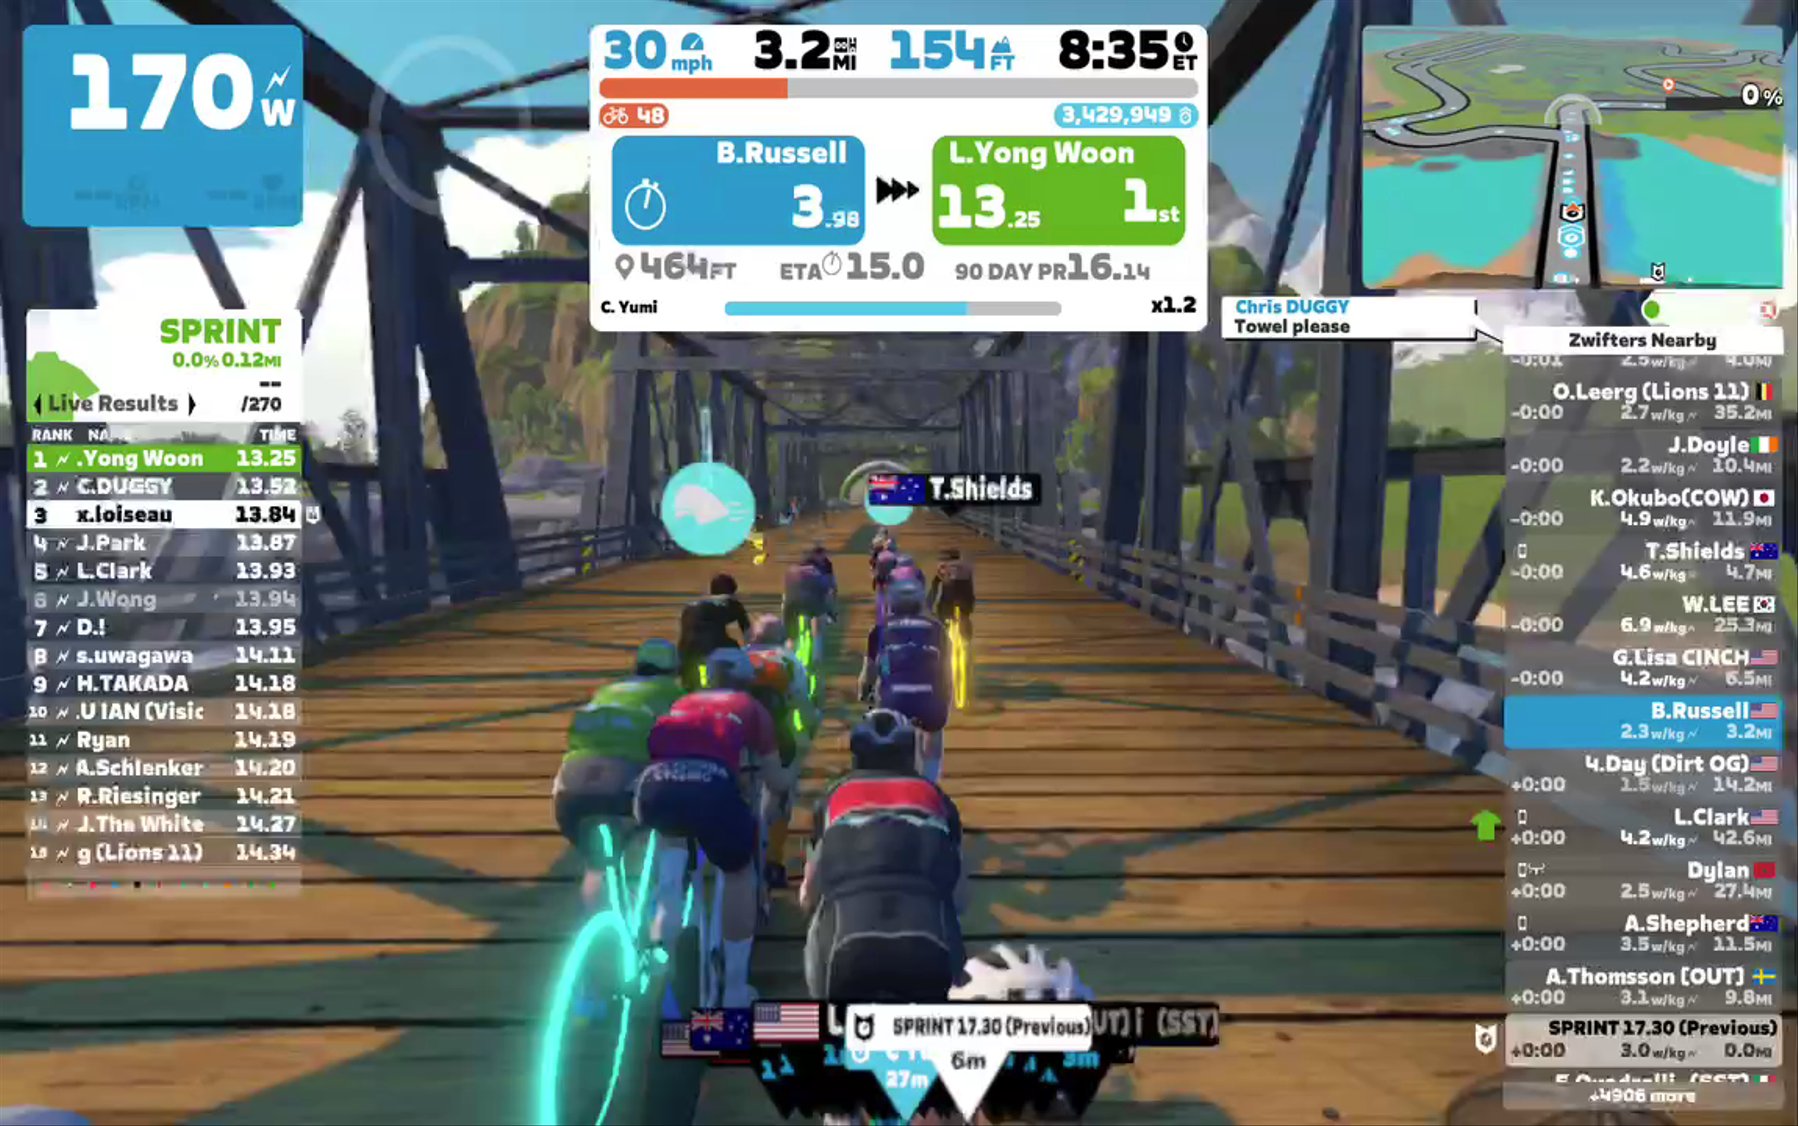 Zwift - Pacer Group Ride: Triple Flat Loops in Watopia with Yumi